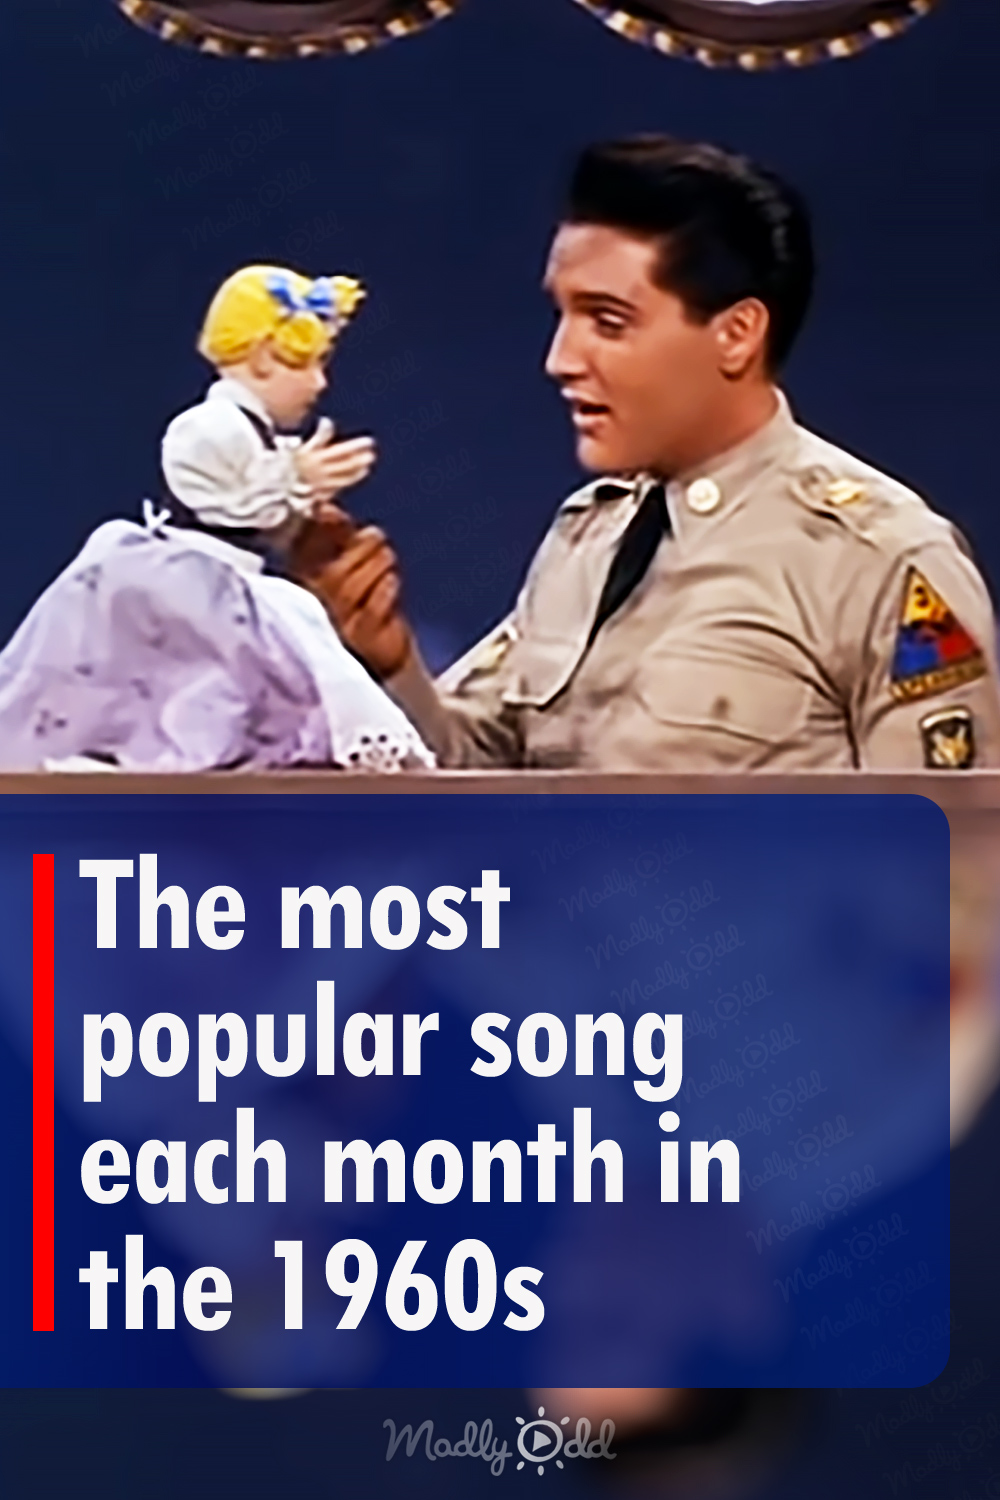 The most popular song each month in the 1960s